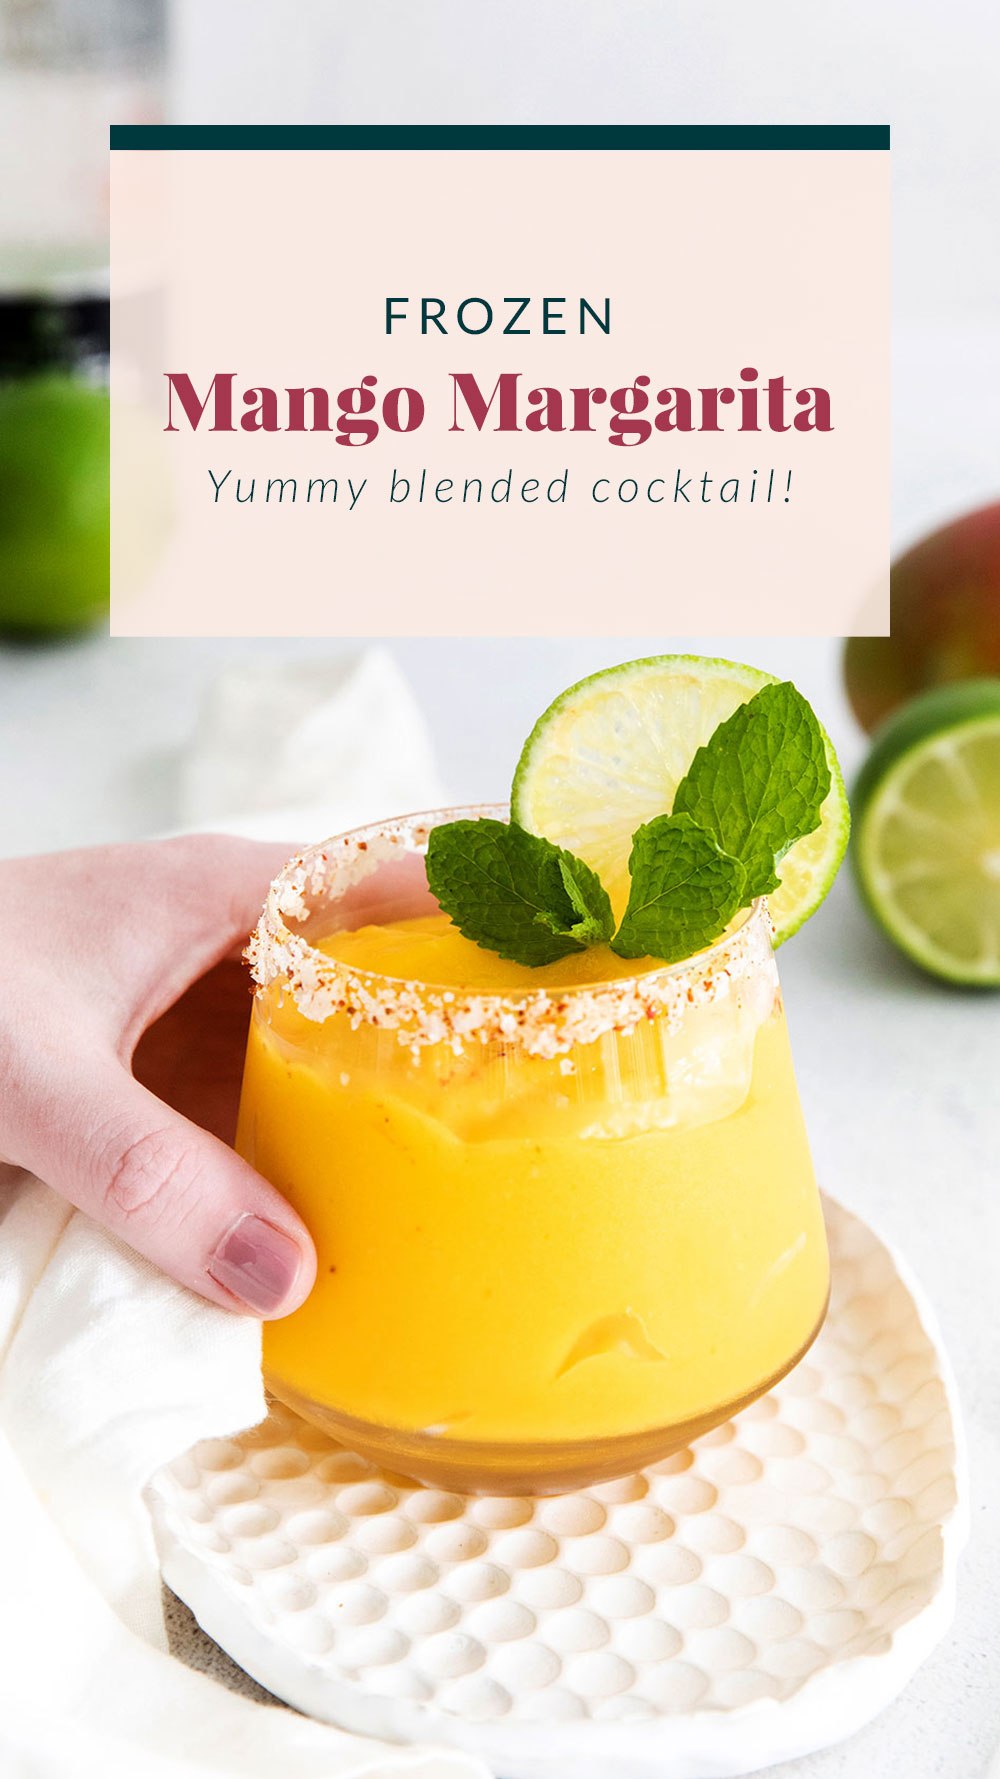 Frozen Mango Margarita (Blended) - Match Foodie Finds - Tasty Made Simple